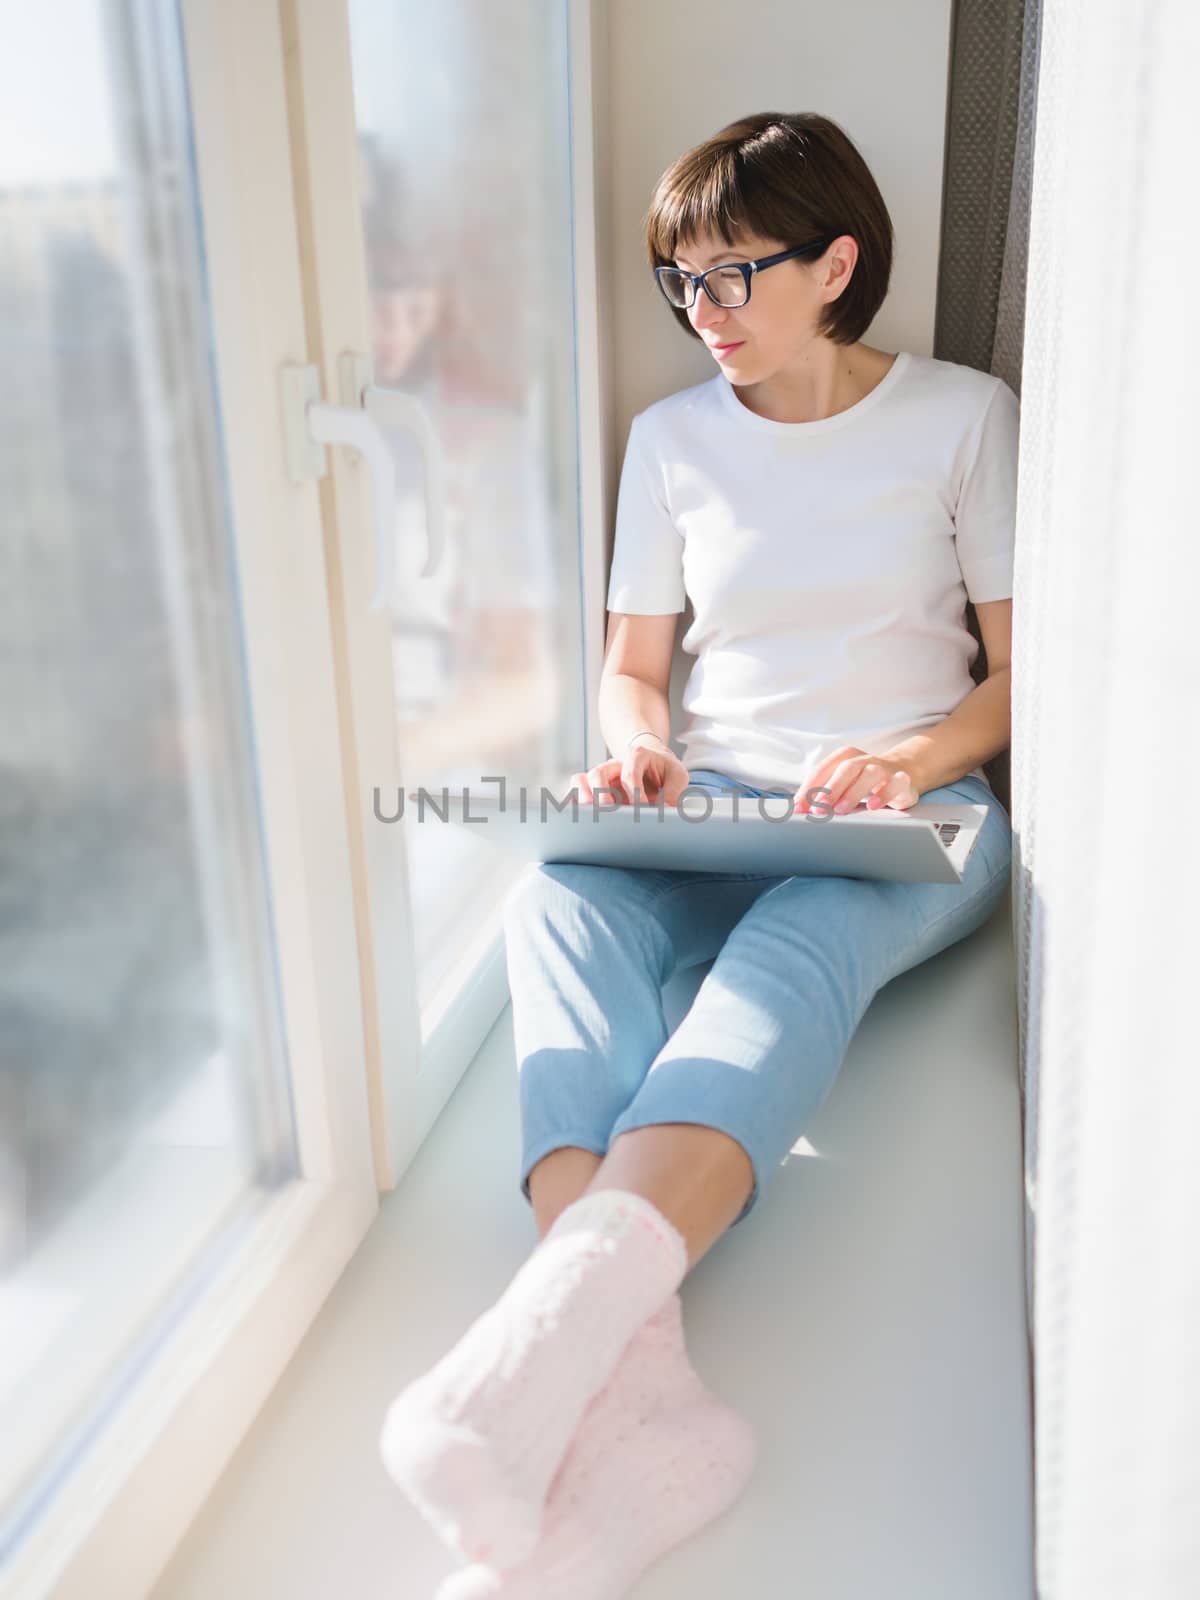 Woman works remotely from home. She sits on window sill with laptop on knees. Lockdown quarantine because of coronavirus COVID19. Self isolation at home.